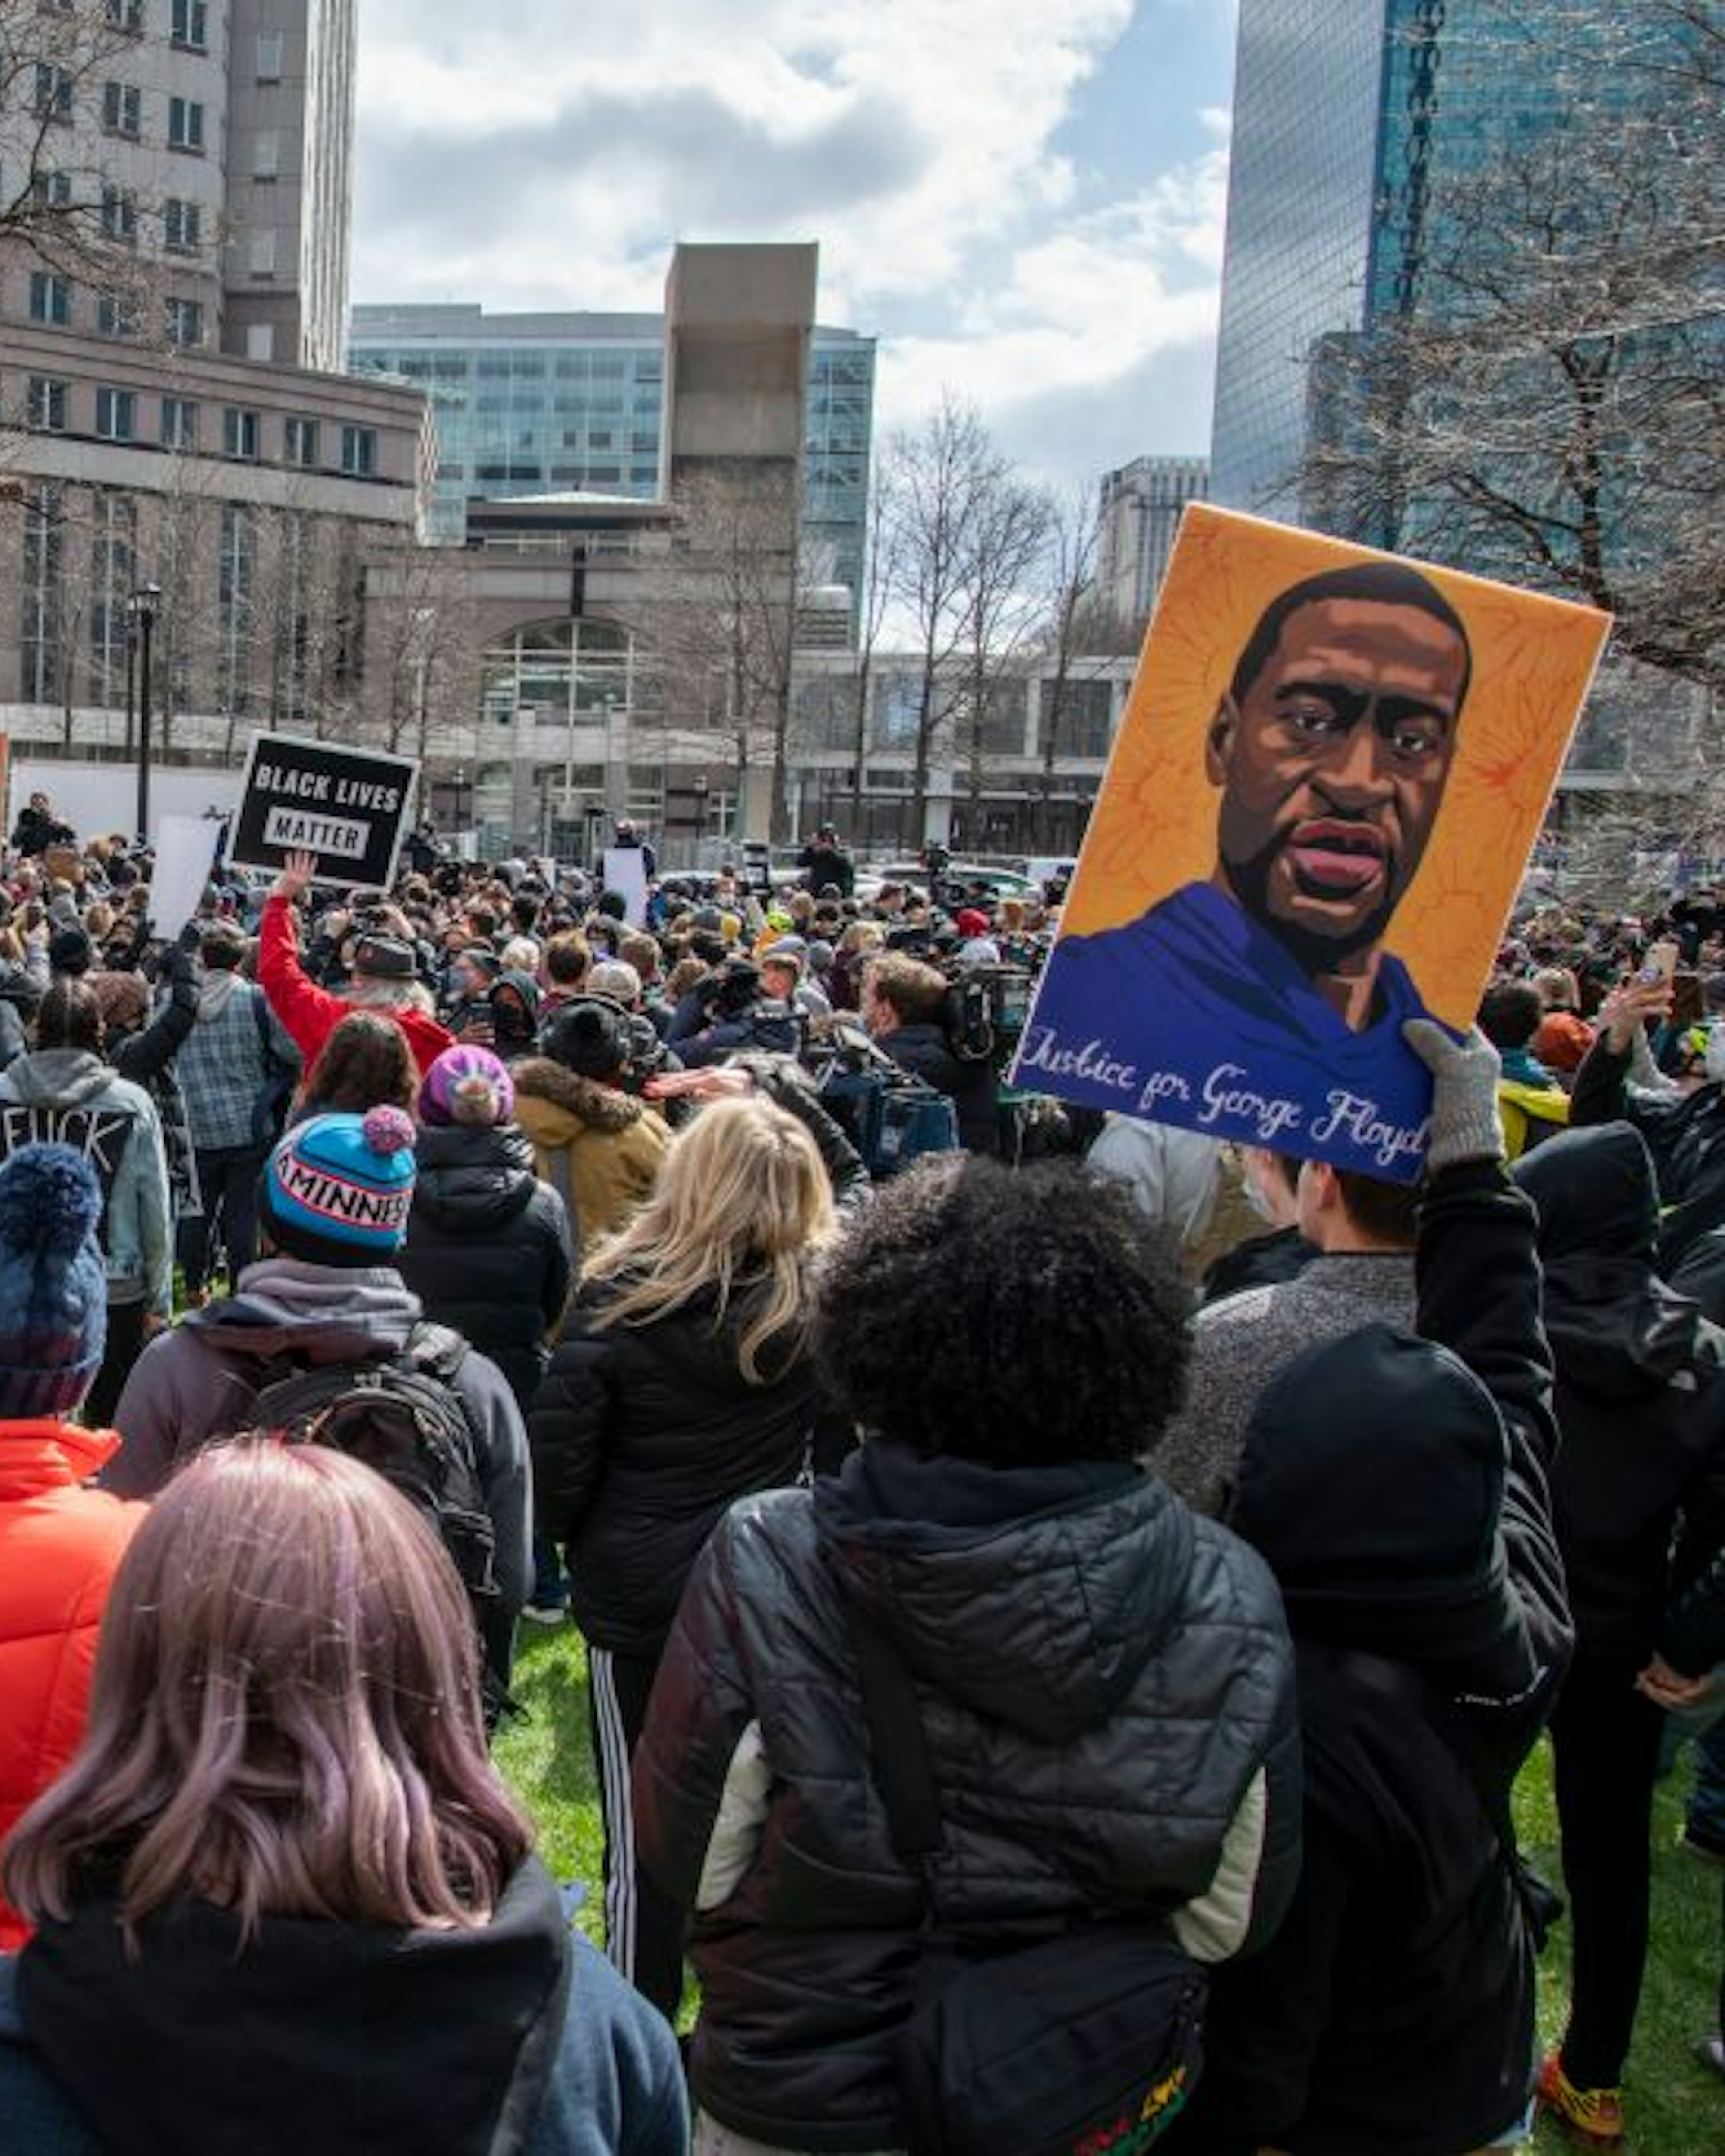 Minneapolis, Minnesota. Protesters hold up signs in front of the government center while waiting for the verdict in the trial of Derek Chauvin for the killing of George Floyd. (Photo by: Michael Siluk/Education Images/Universal Images Group via Getty Images)